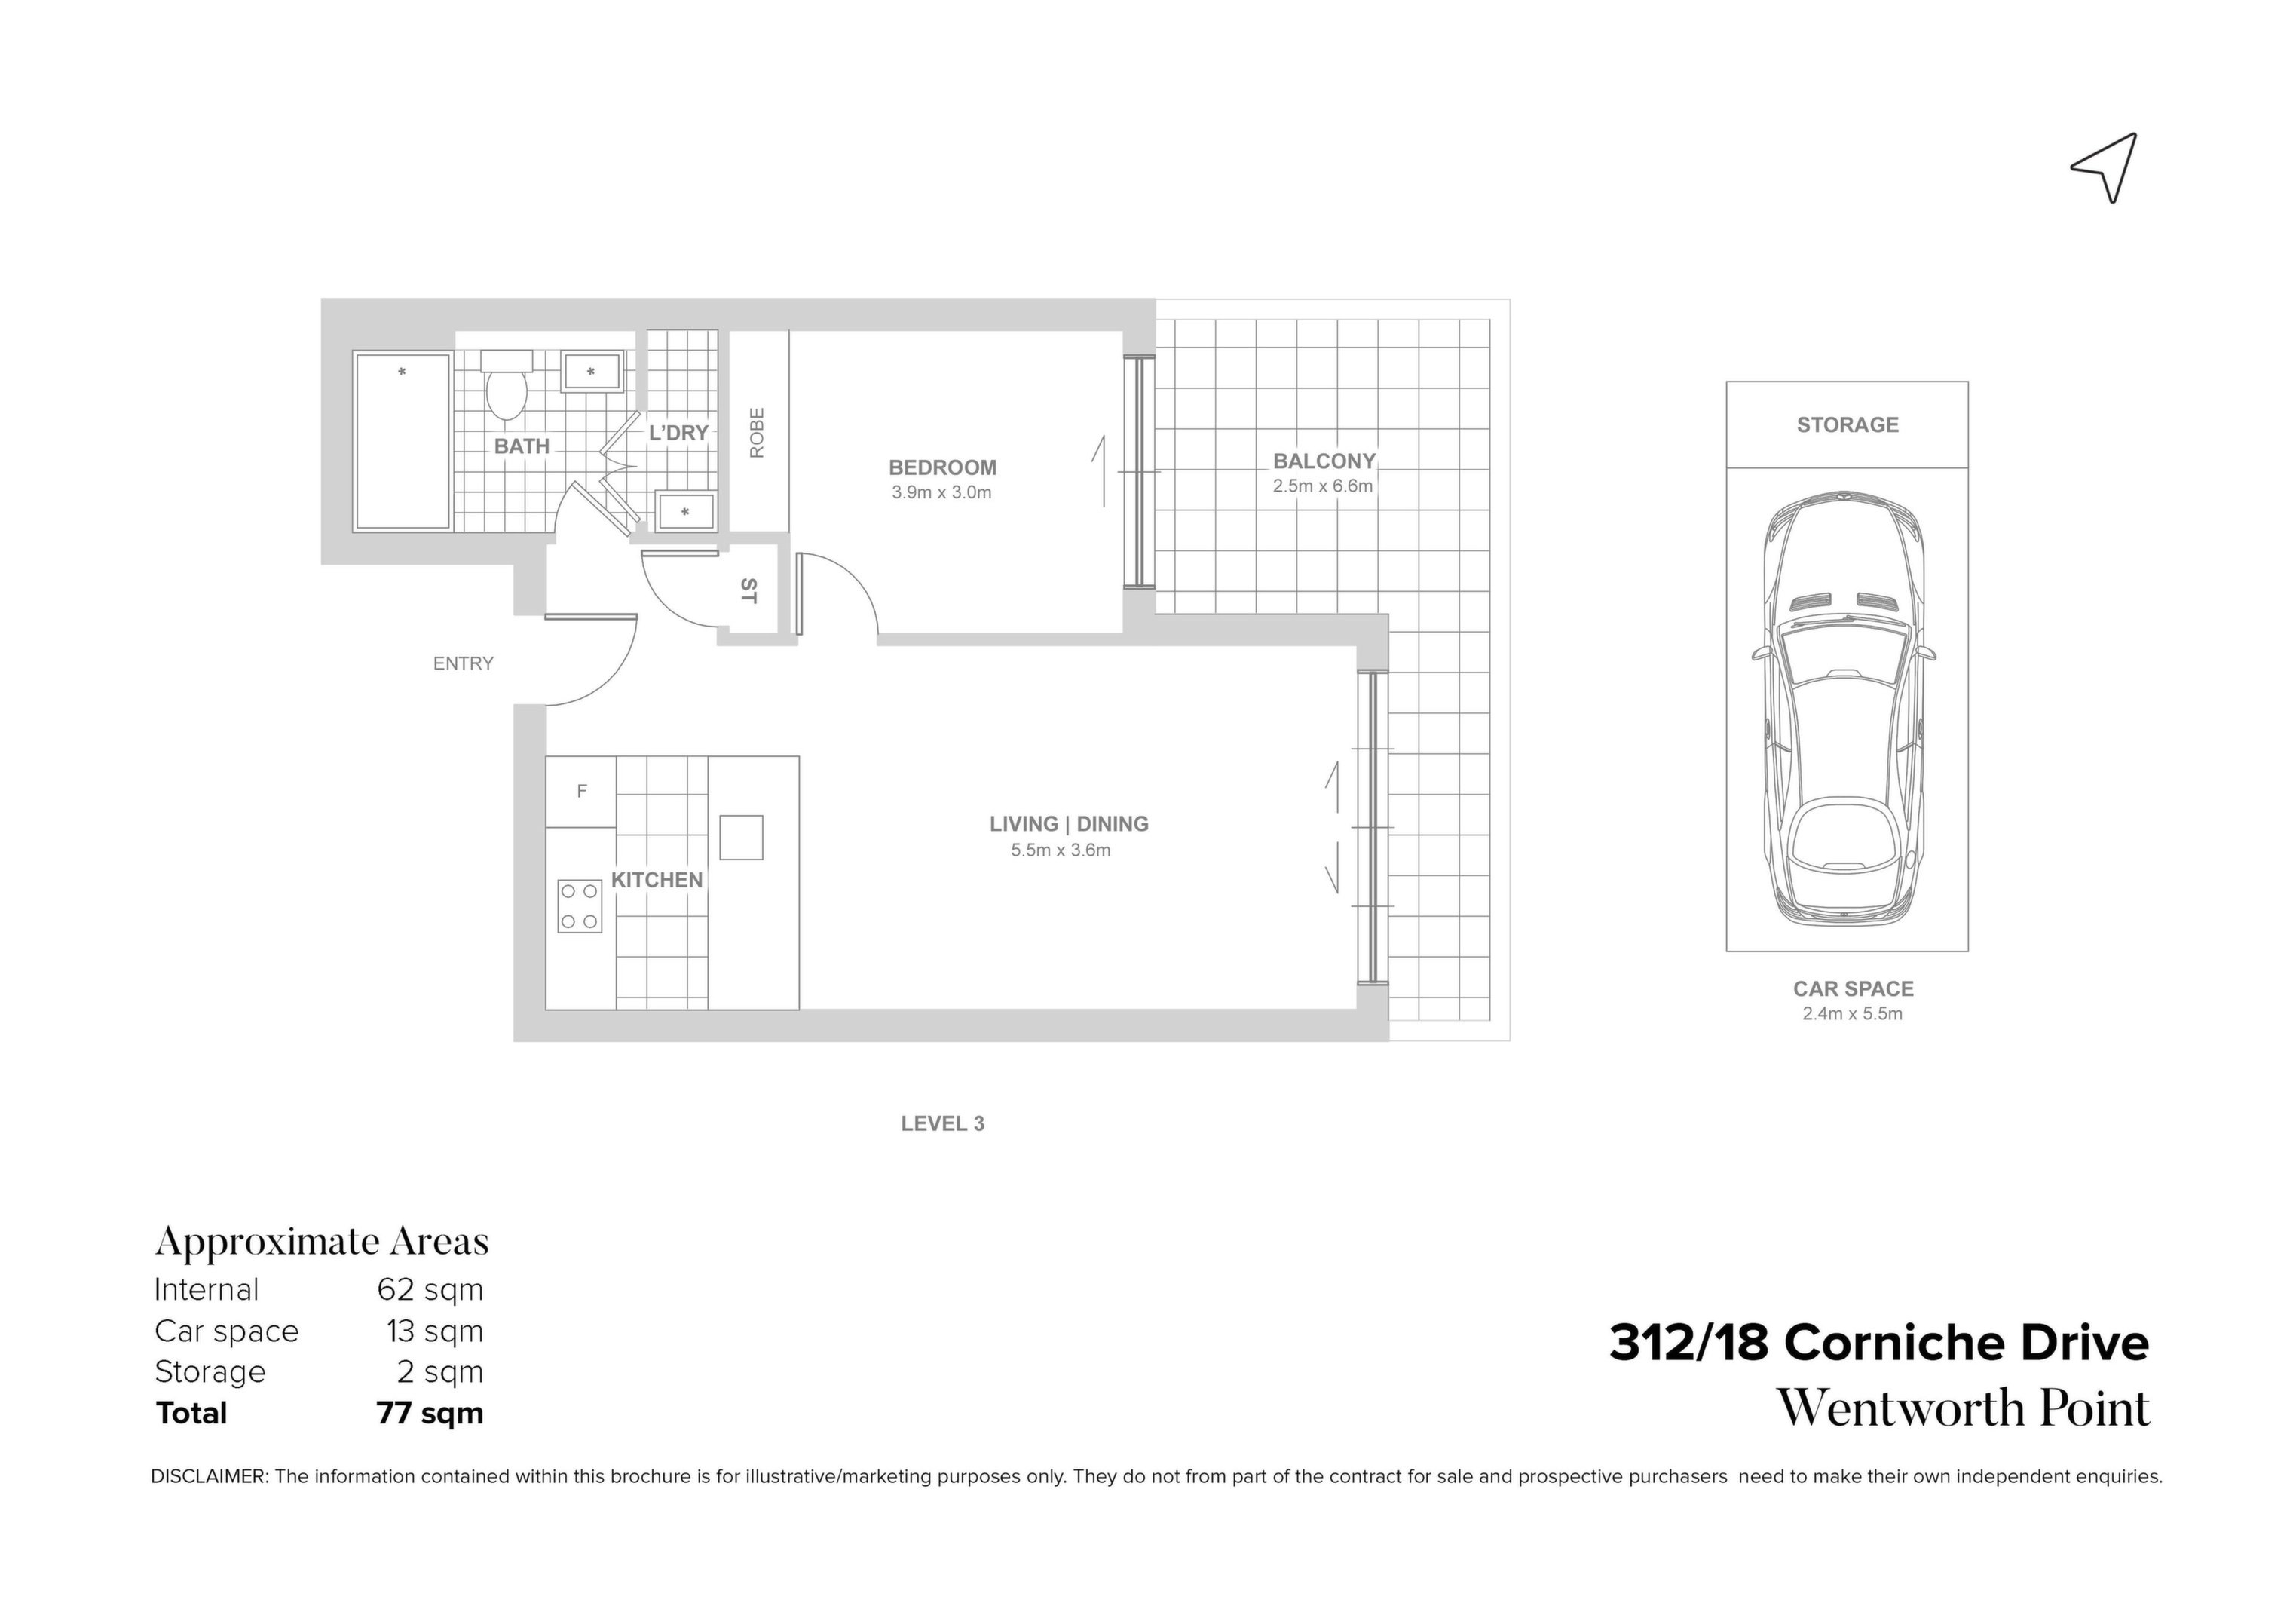 312/18 Corniche Drive, Wentworth Point Sold by Chidiac Realty - floorplan